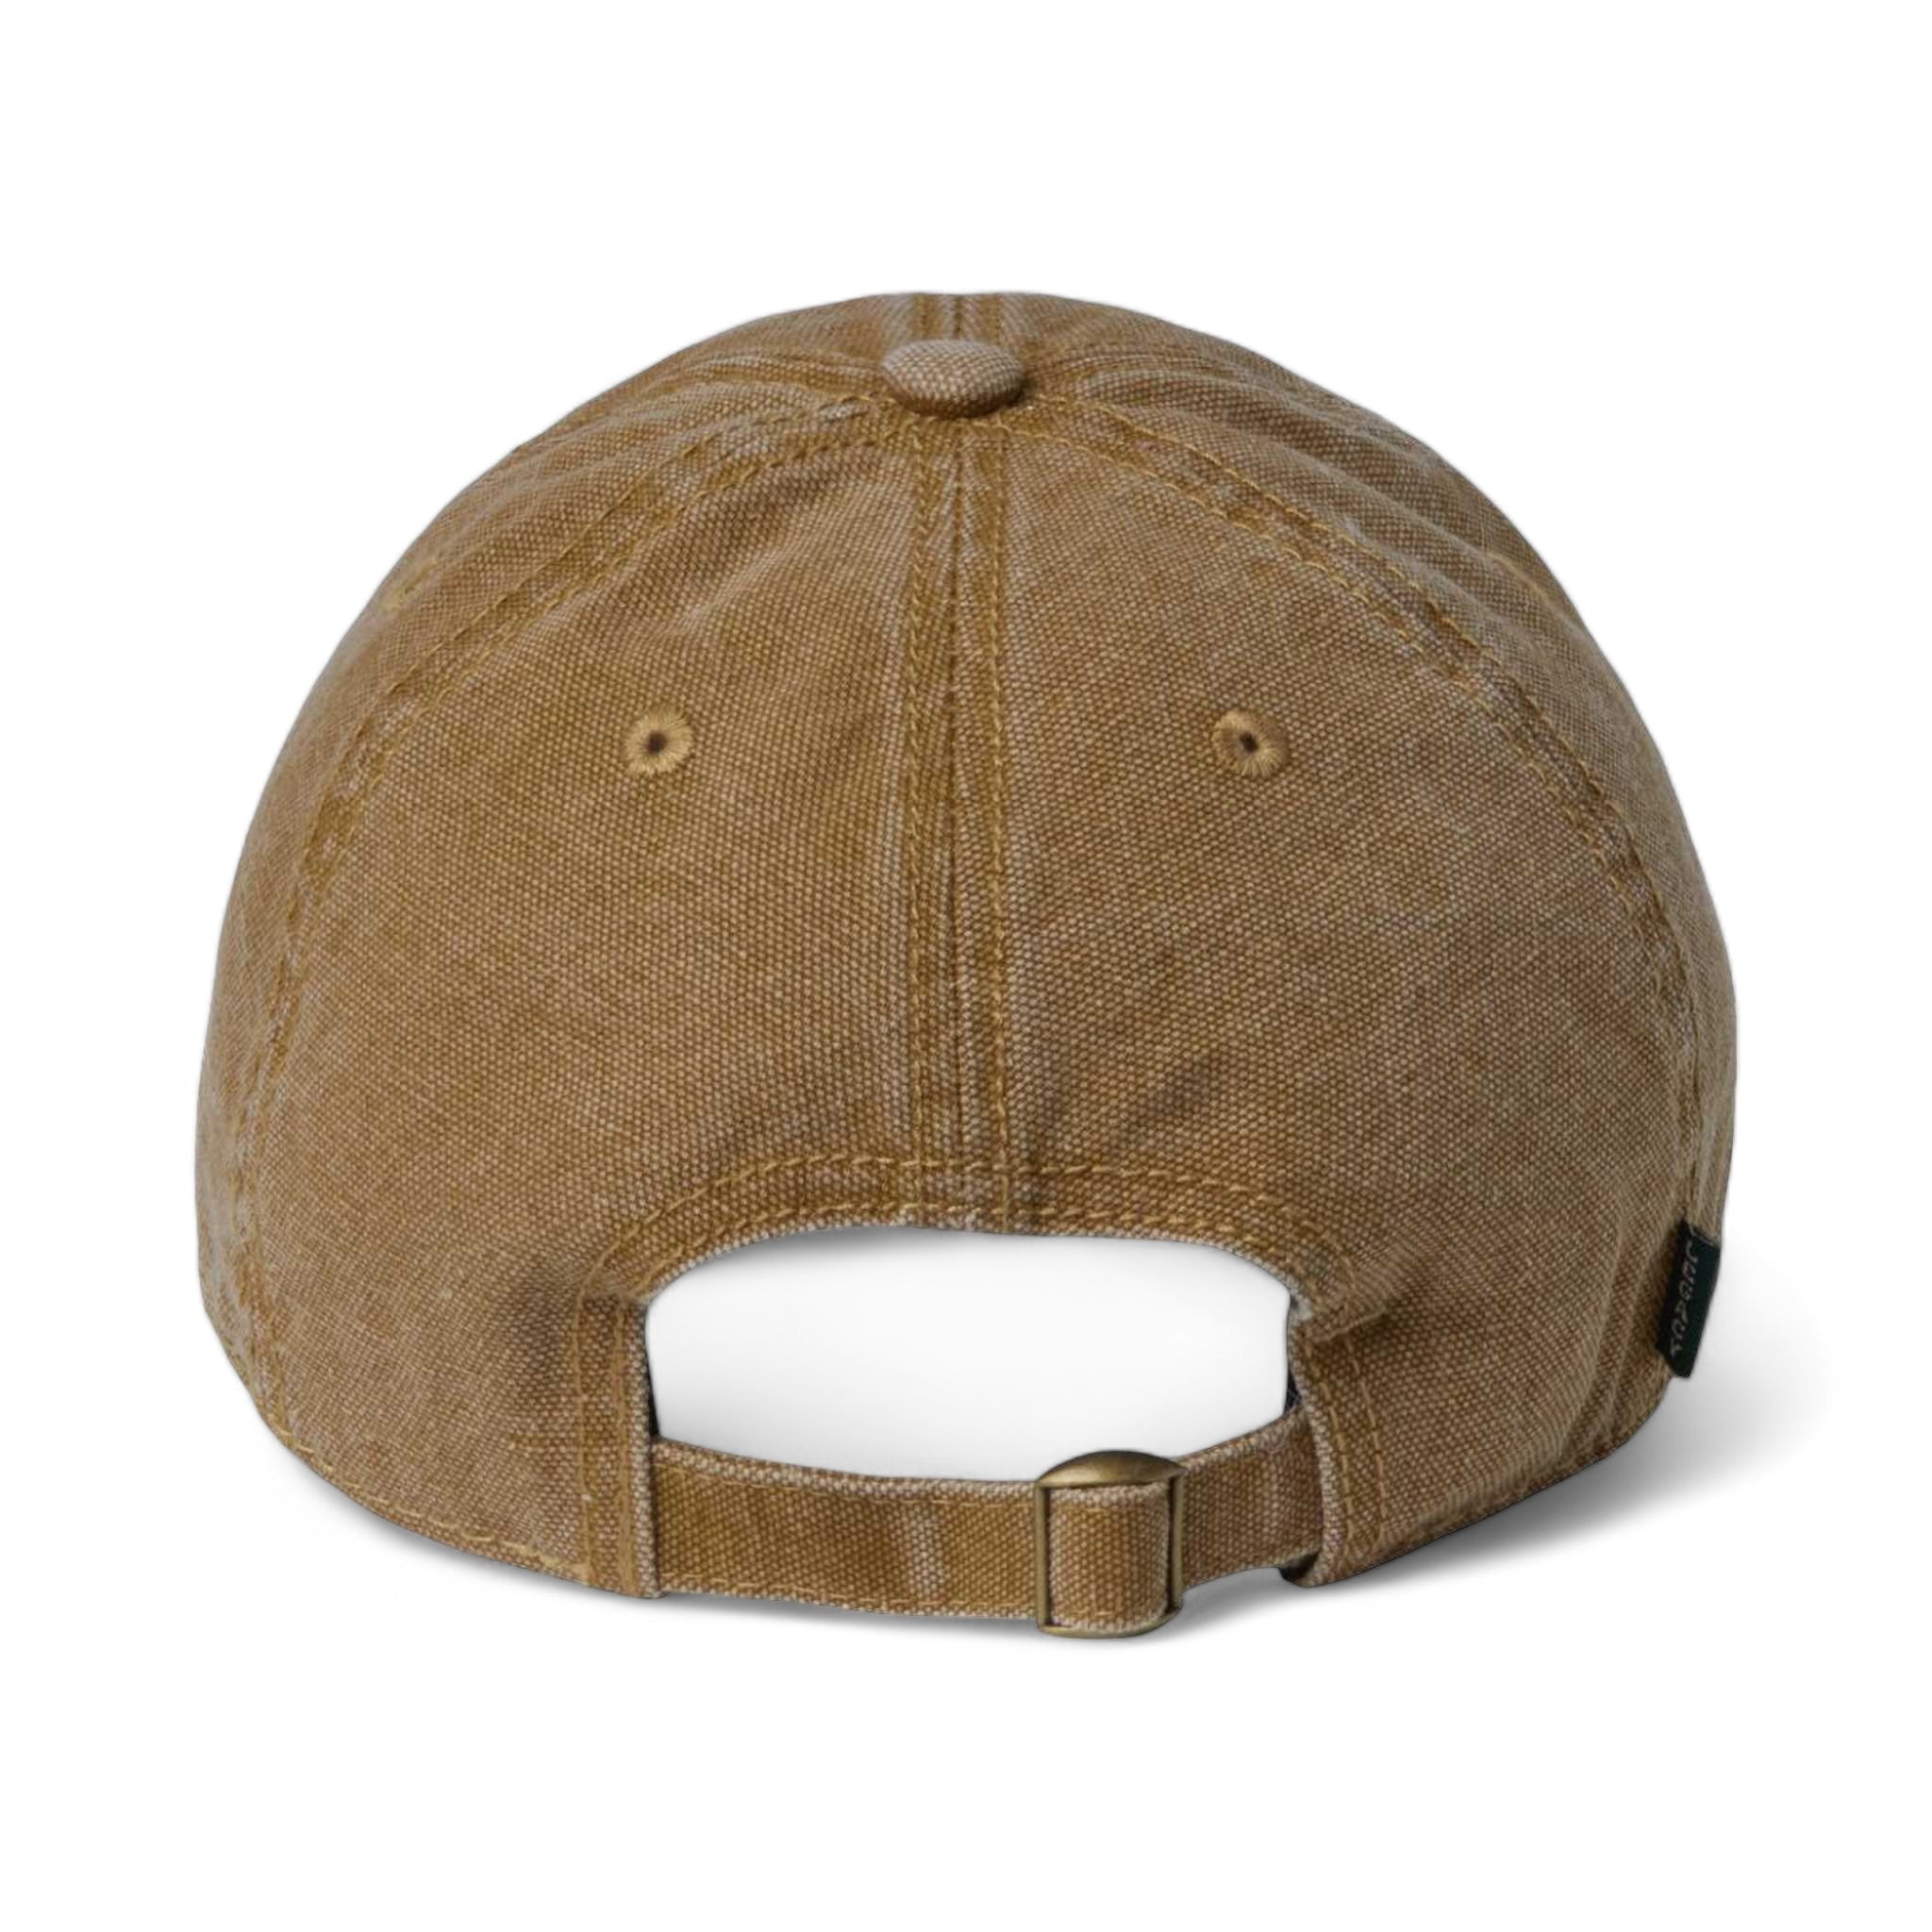 Back view of LEGACY DTAST custom hat in camel